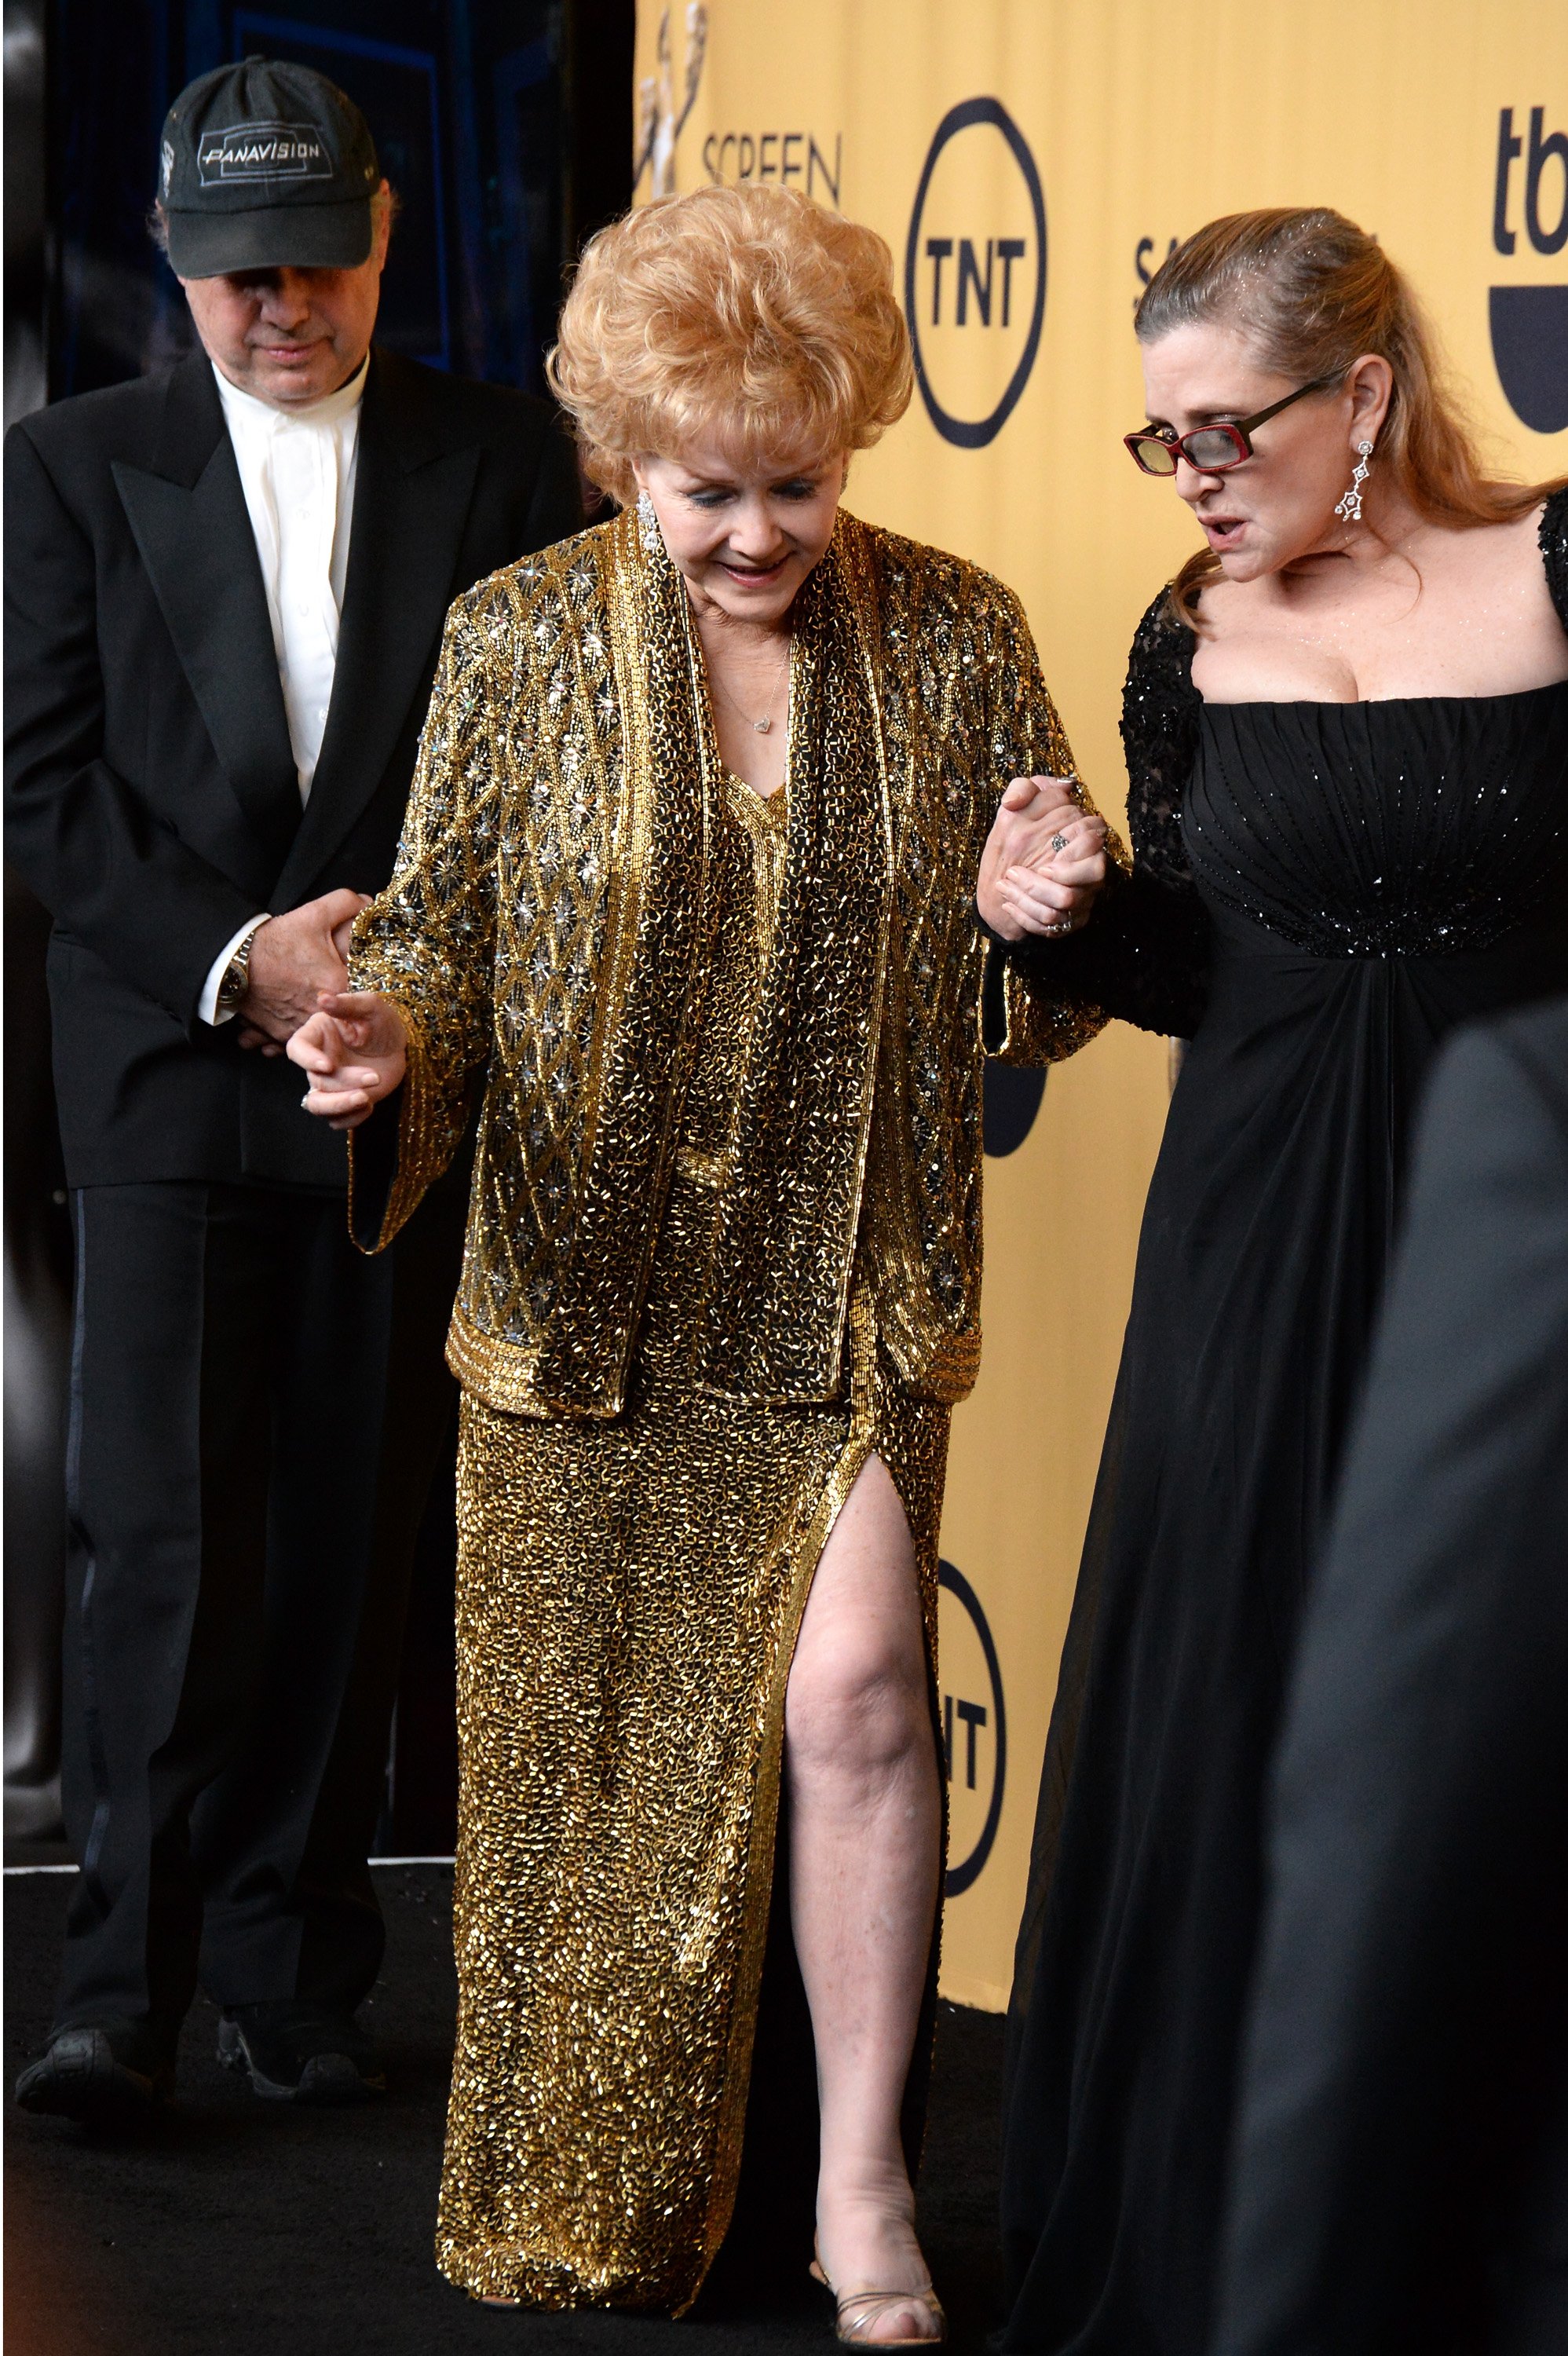 Todd Fisher, honoree Debbie Reynolds and actress Carrie Fisher pose in the press room at the 21st Annual Screen Actors Guild Awards at The Shrine Auditorium on January 25, 2015 in Los Angeles, California. | Source: Getty Images